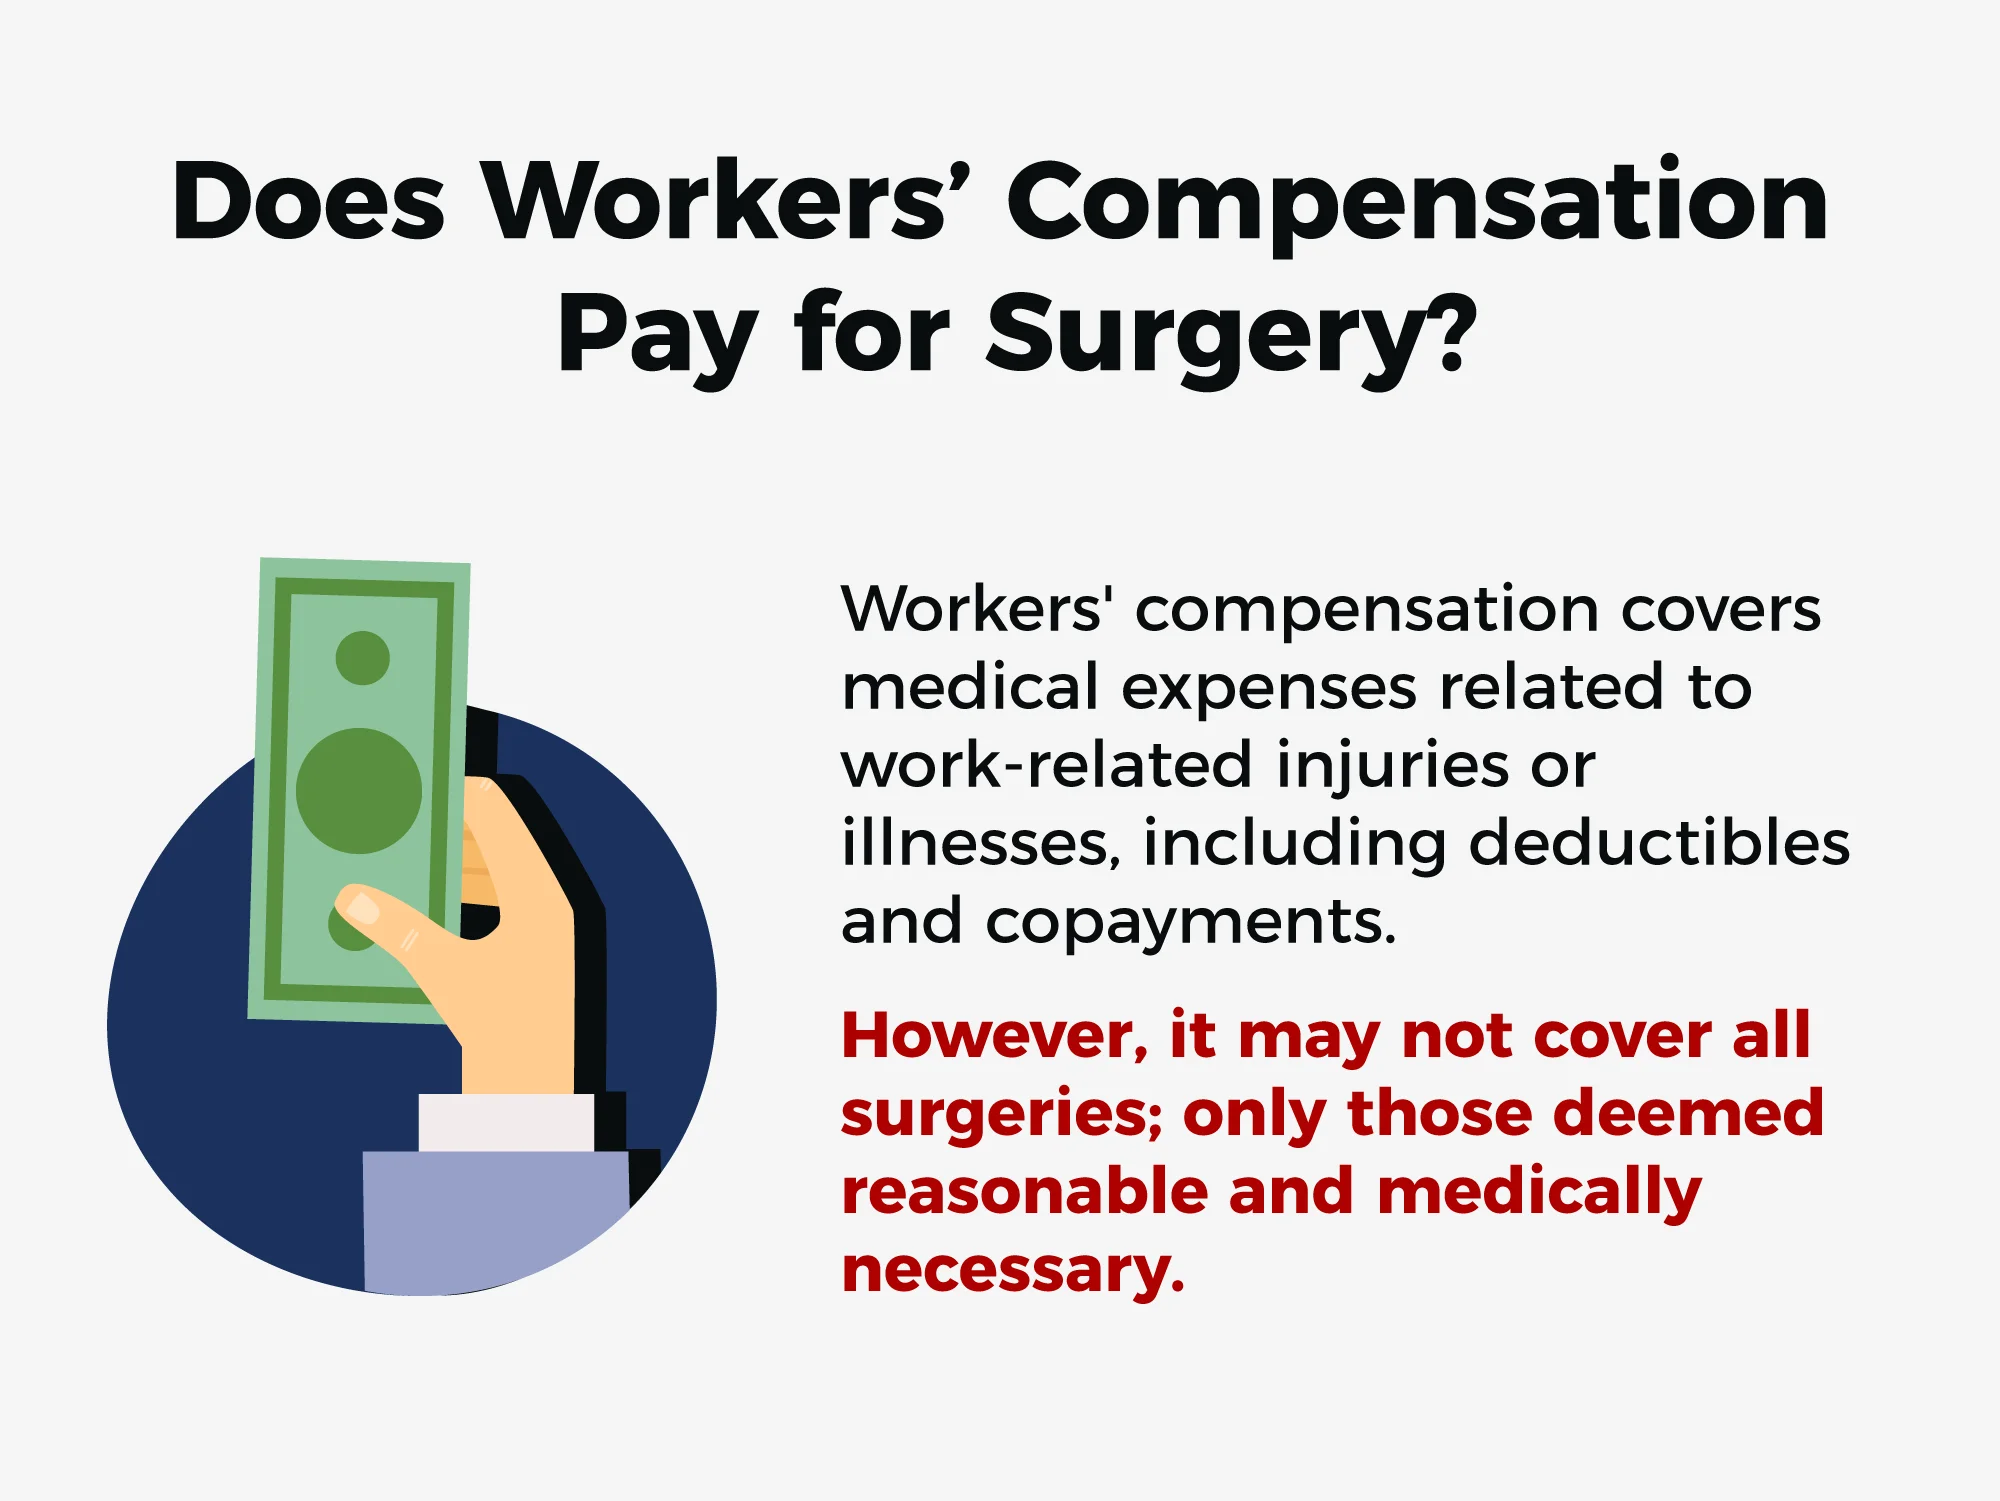 does workers' compensation pay for surgery?